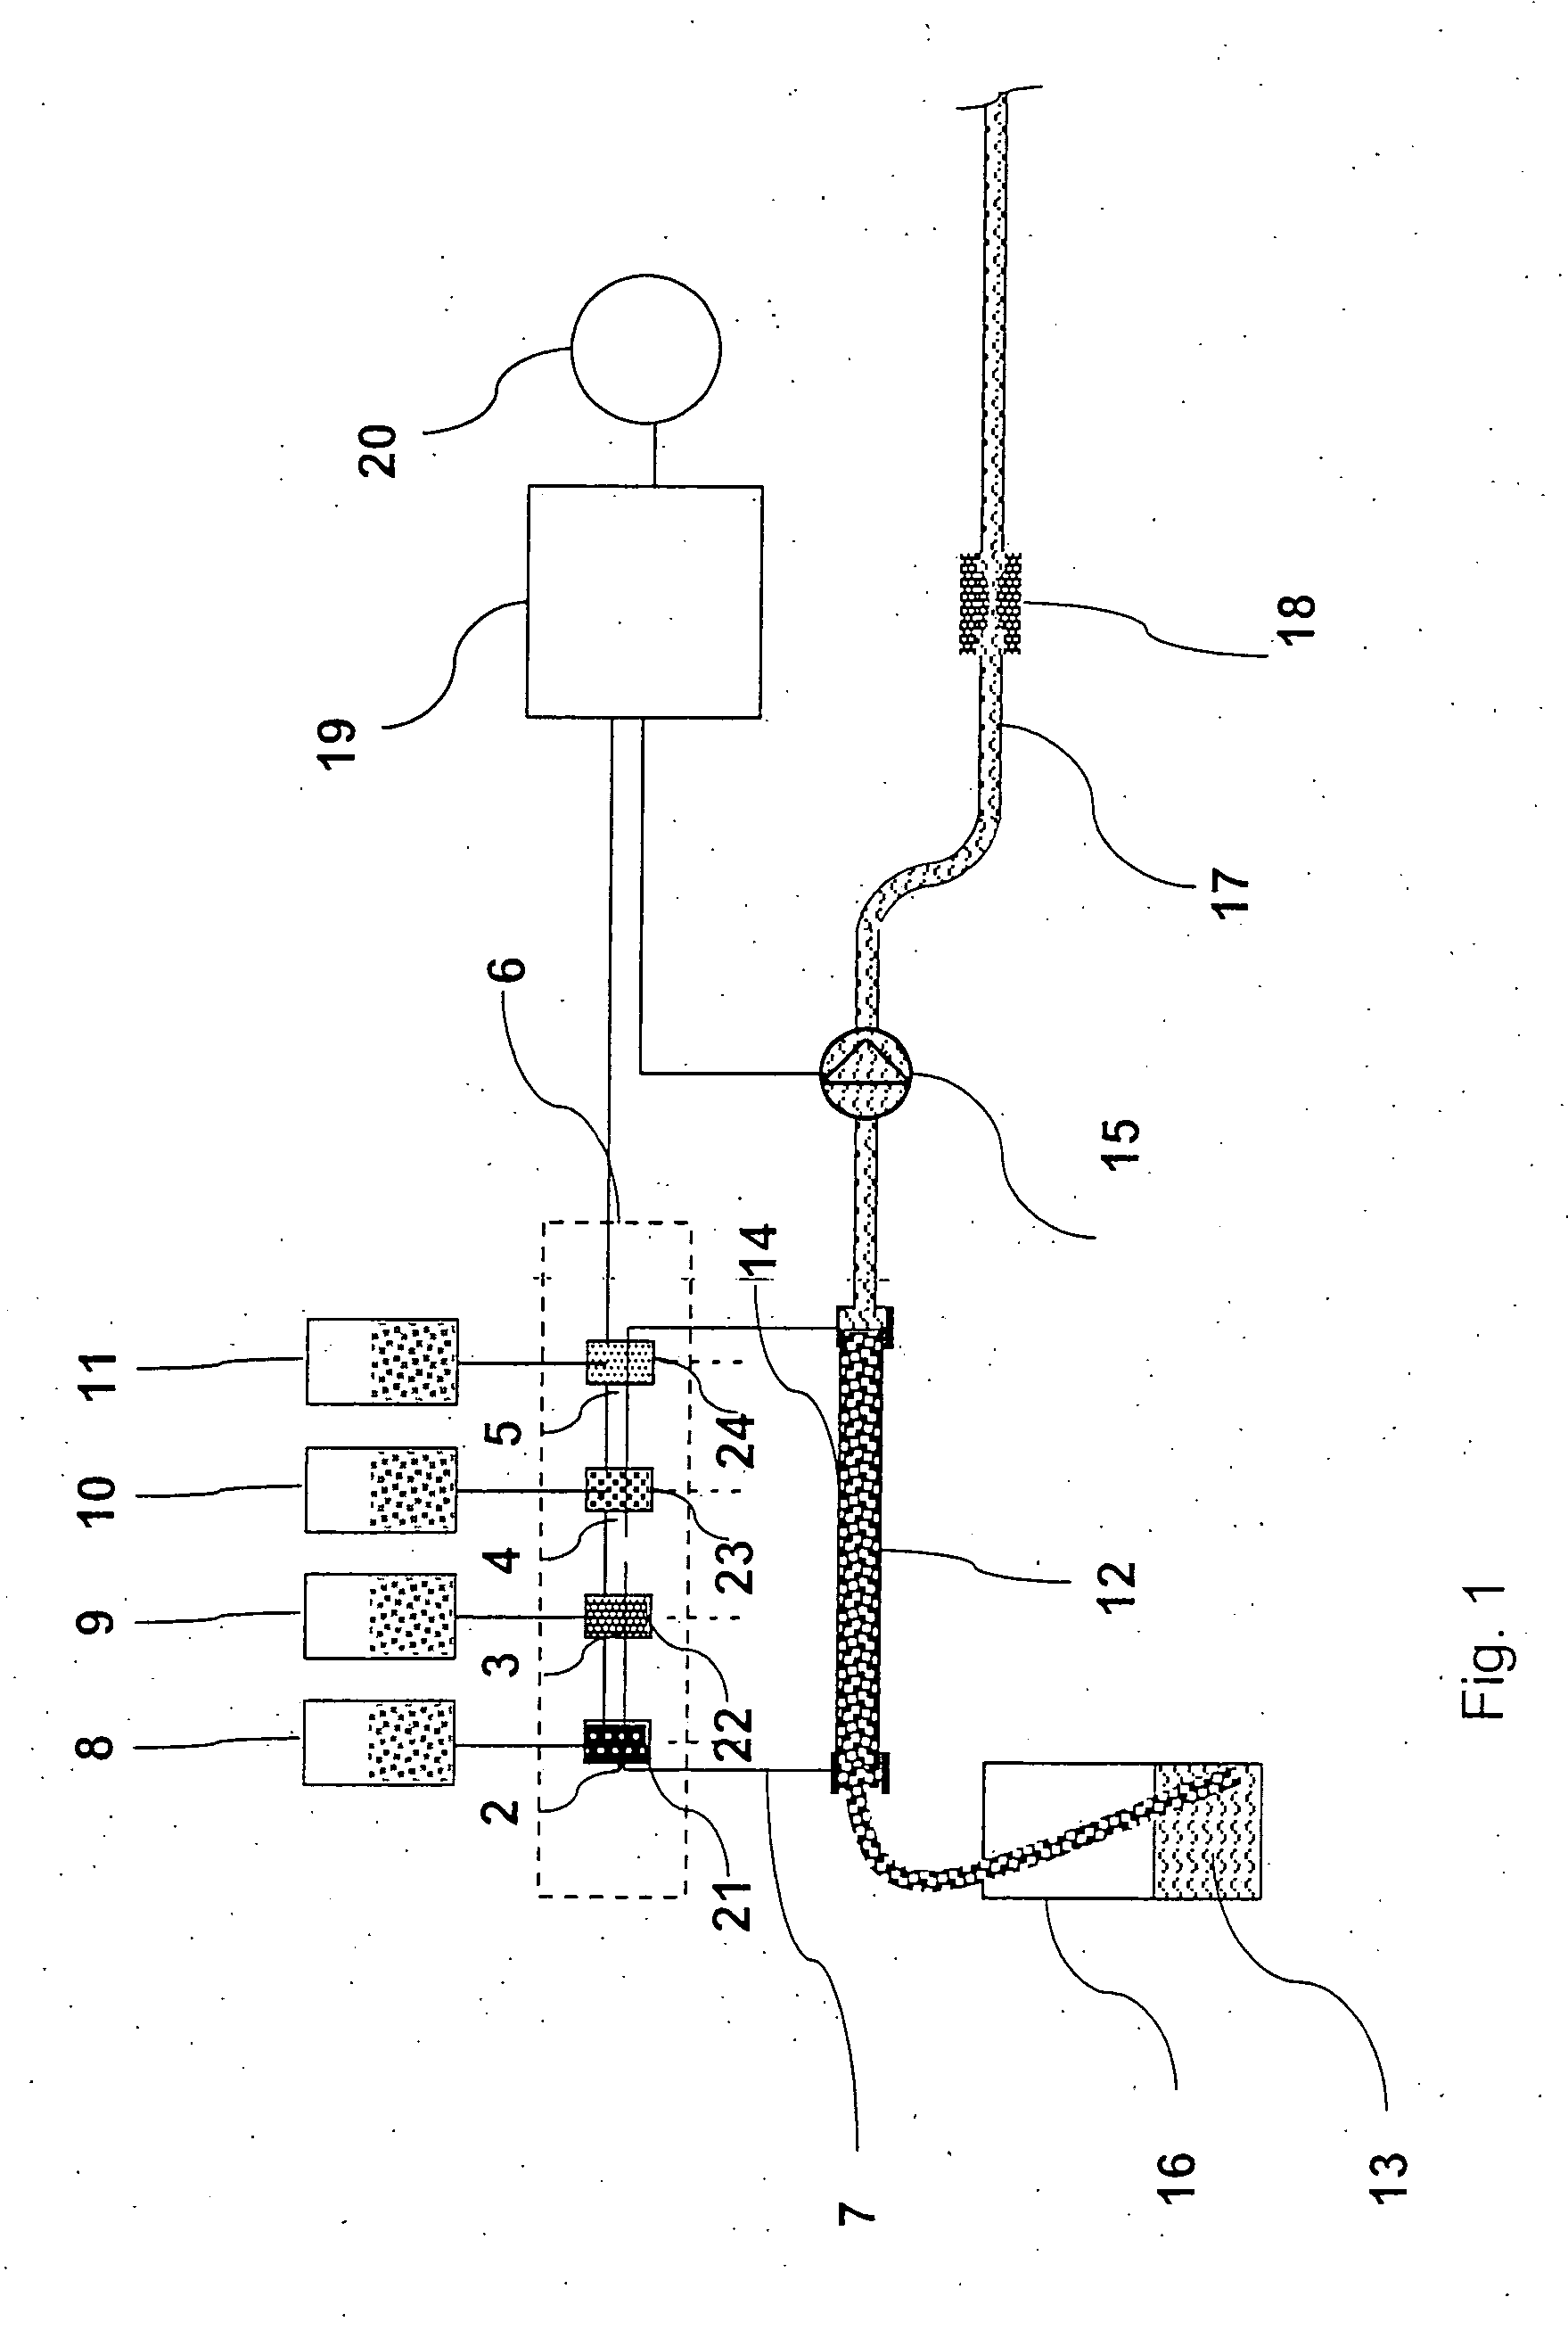 Device for dispensing substances